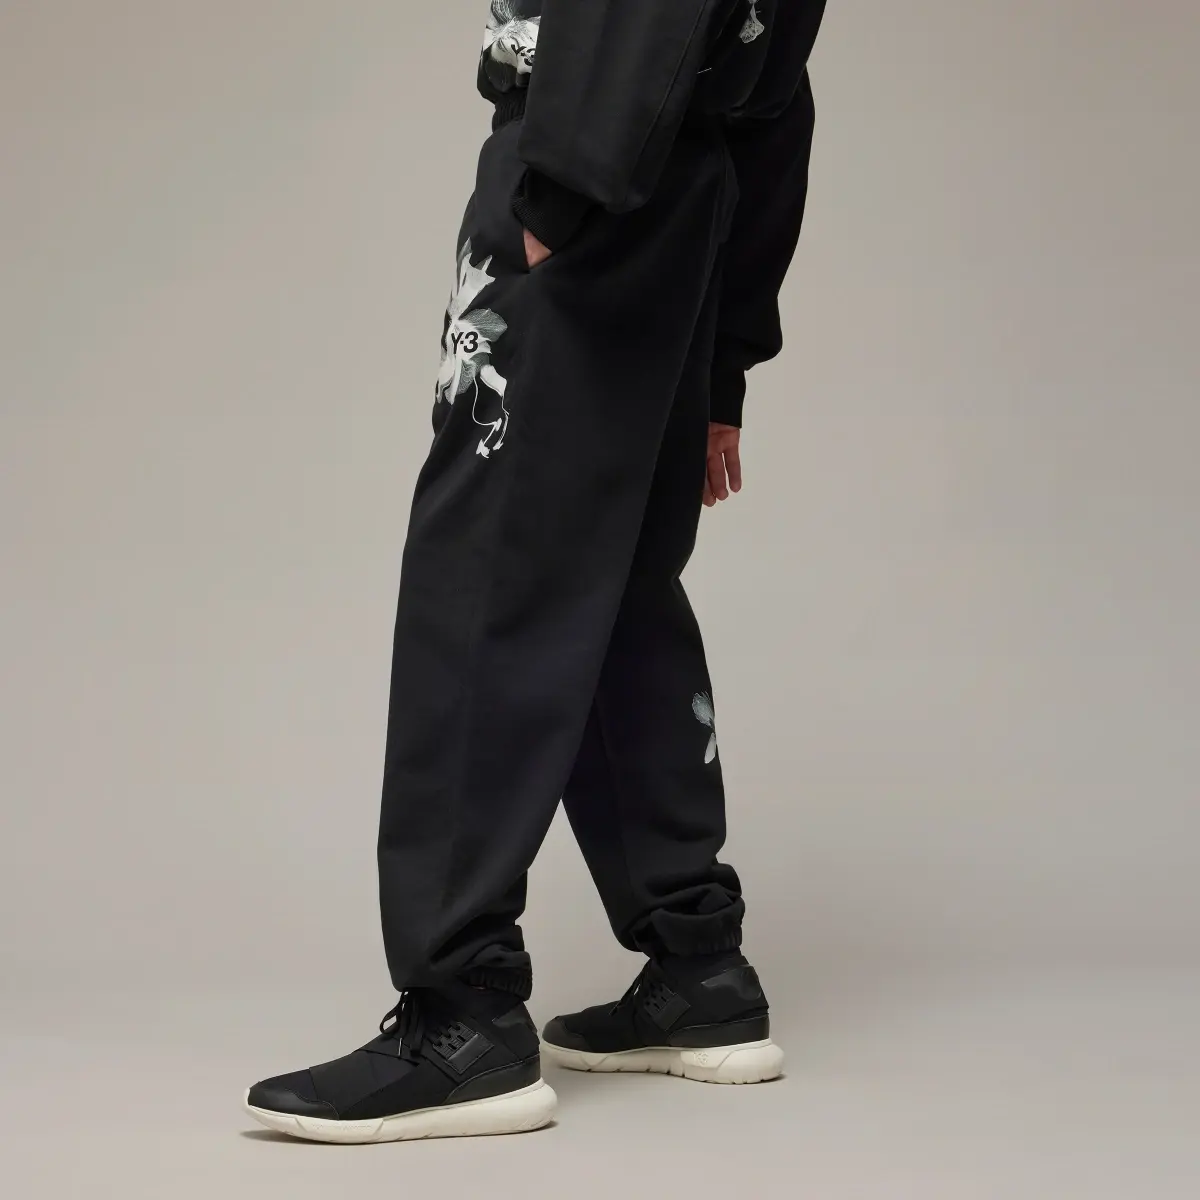 Adidas Y-3 Graphic French Terry Pants. 2